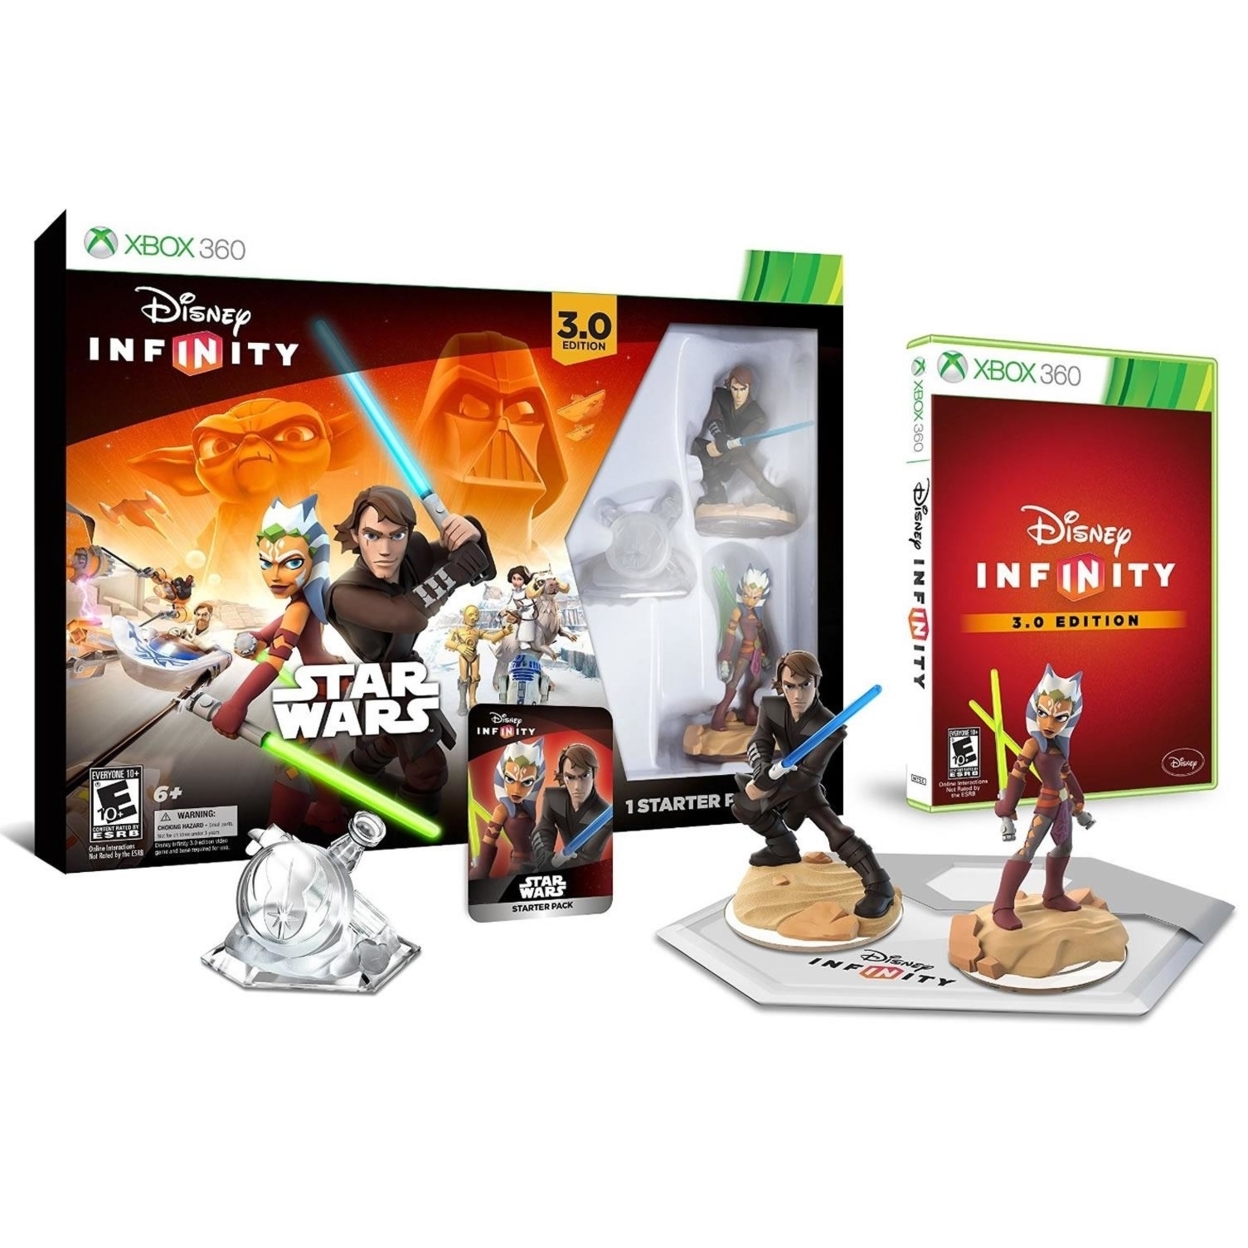 Disney Infinity 3.0 Edition Starter Pack (Xbox 360) - image 1 of 7